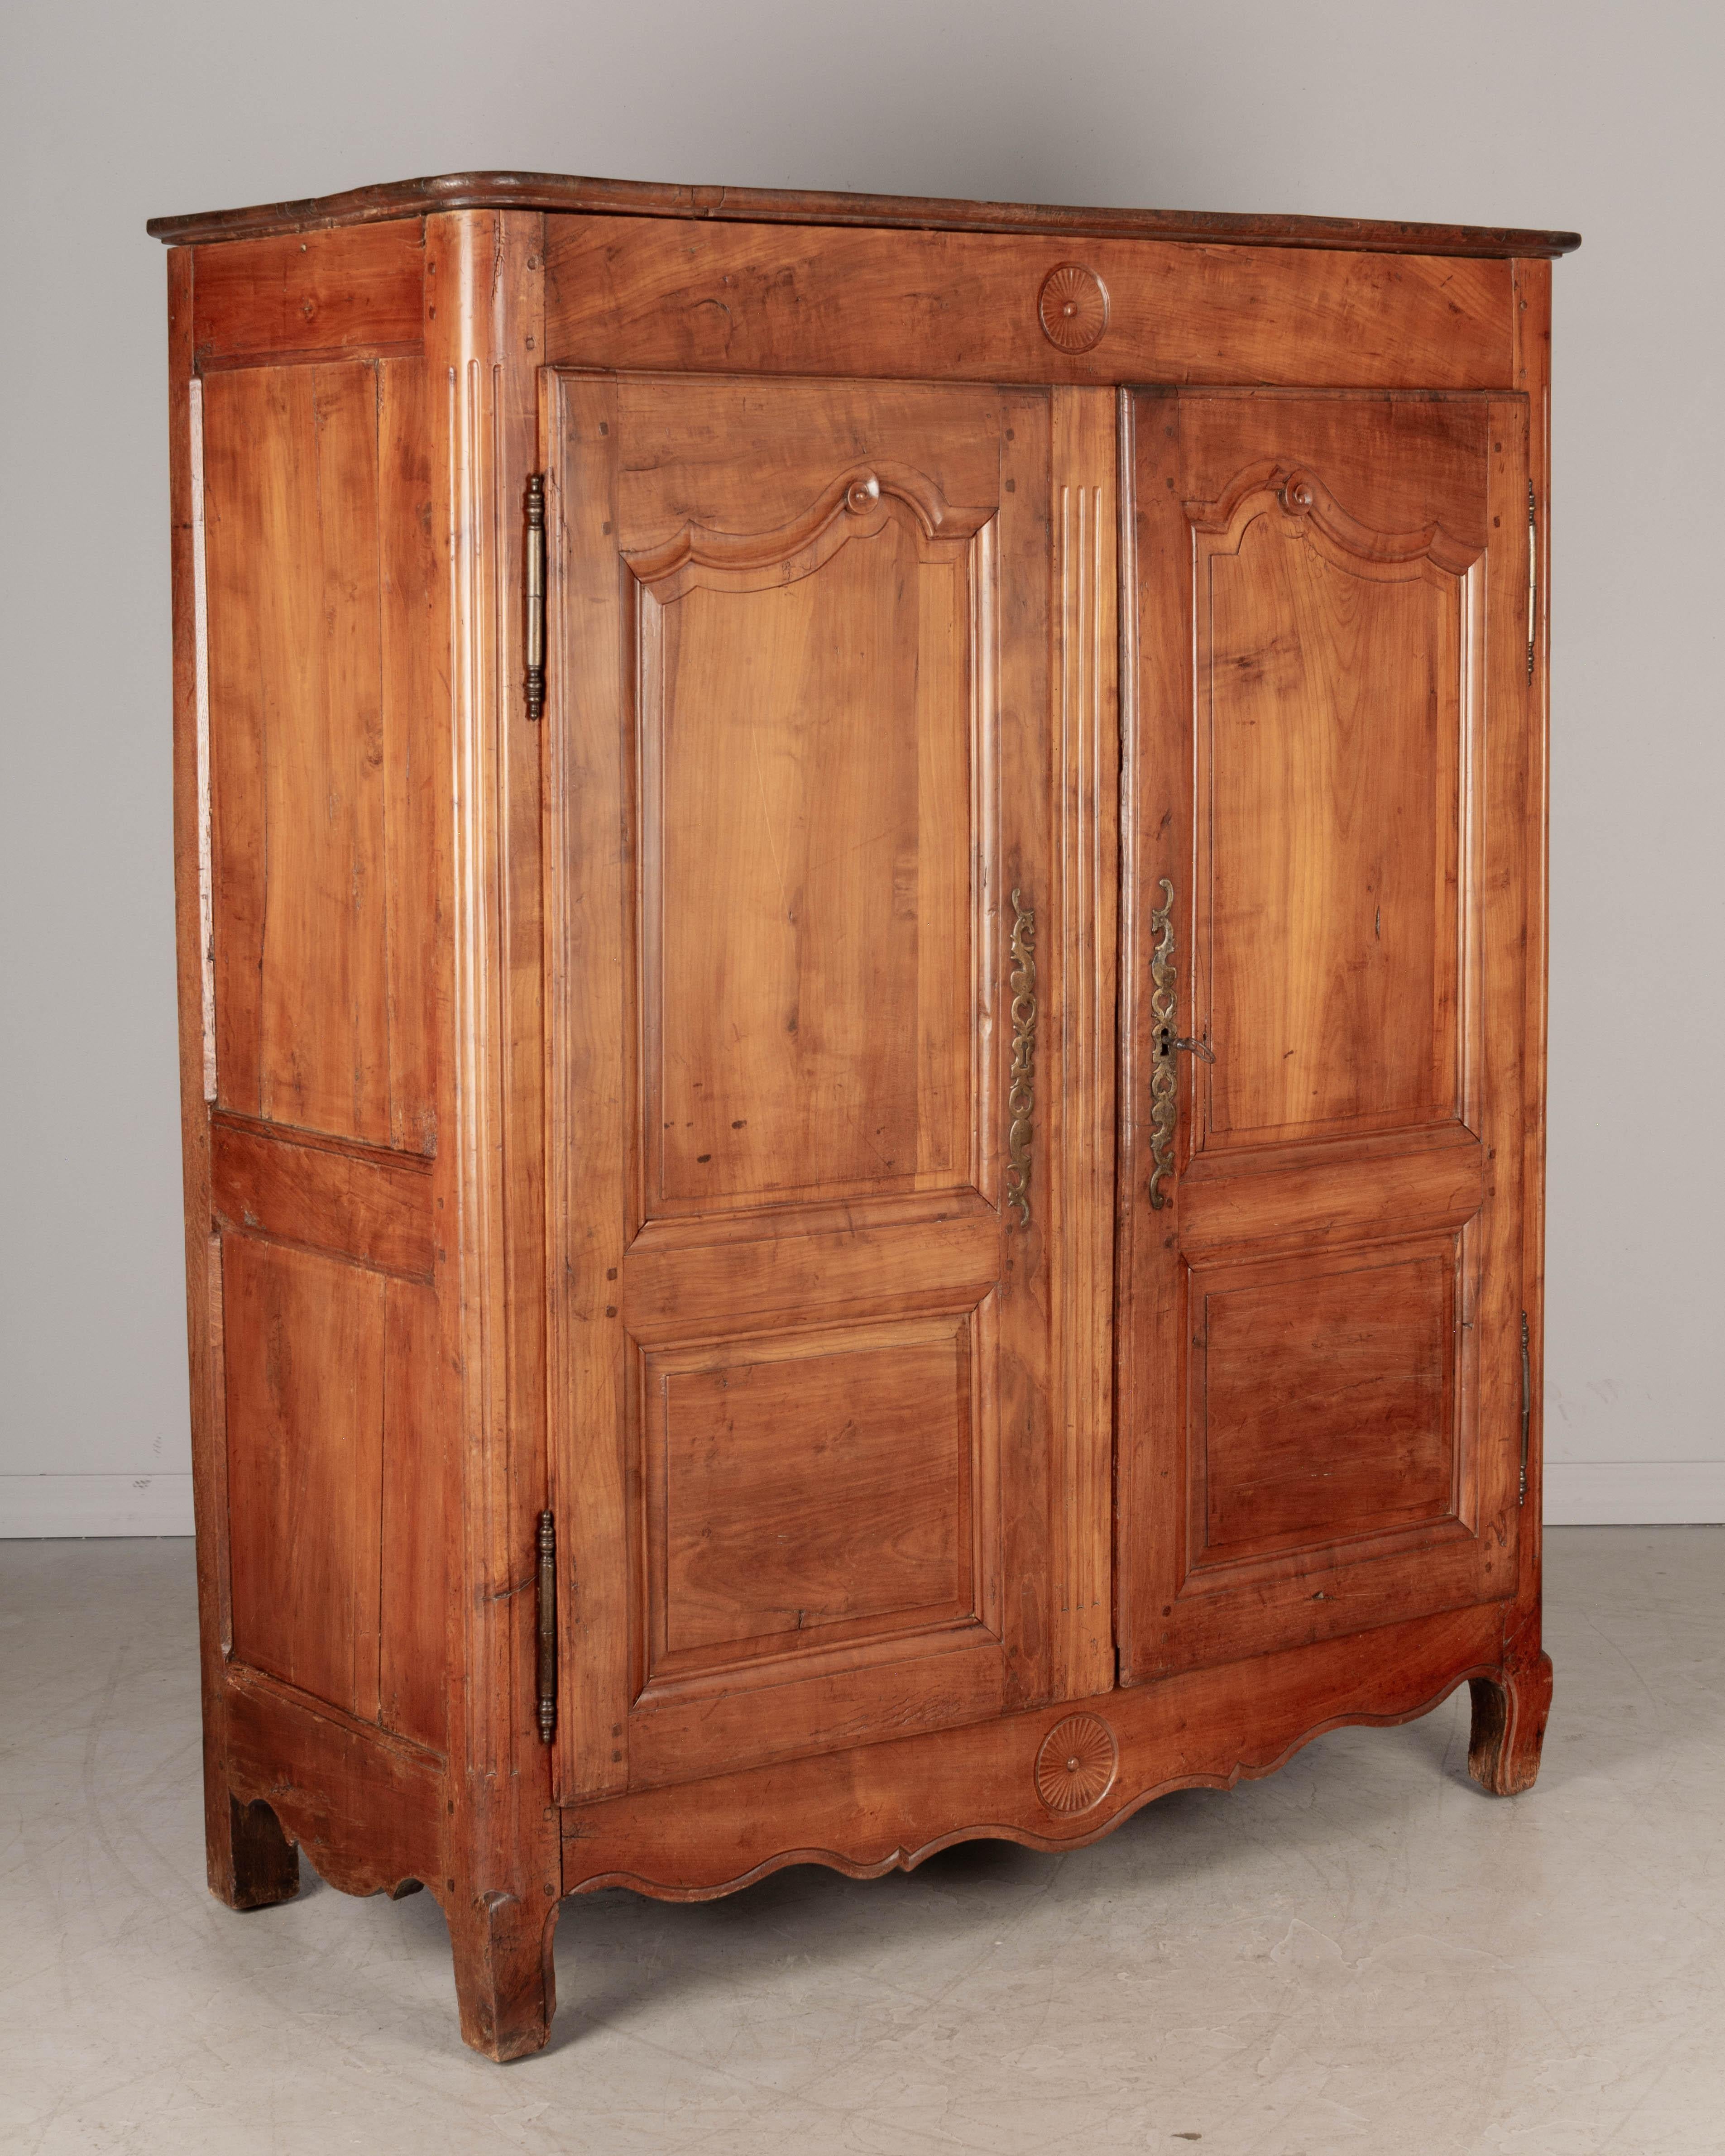 An early 19th century Louis XV style French petite armoire, or wardrobe, from the Loire Valley. Made of solid cherry with scroll carving on the door panels and simple circular carved details at the top and on the apron. Original iron hardware and